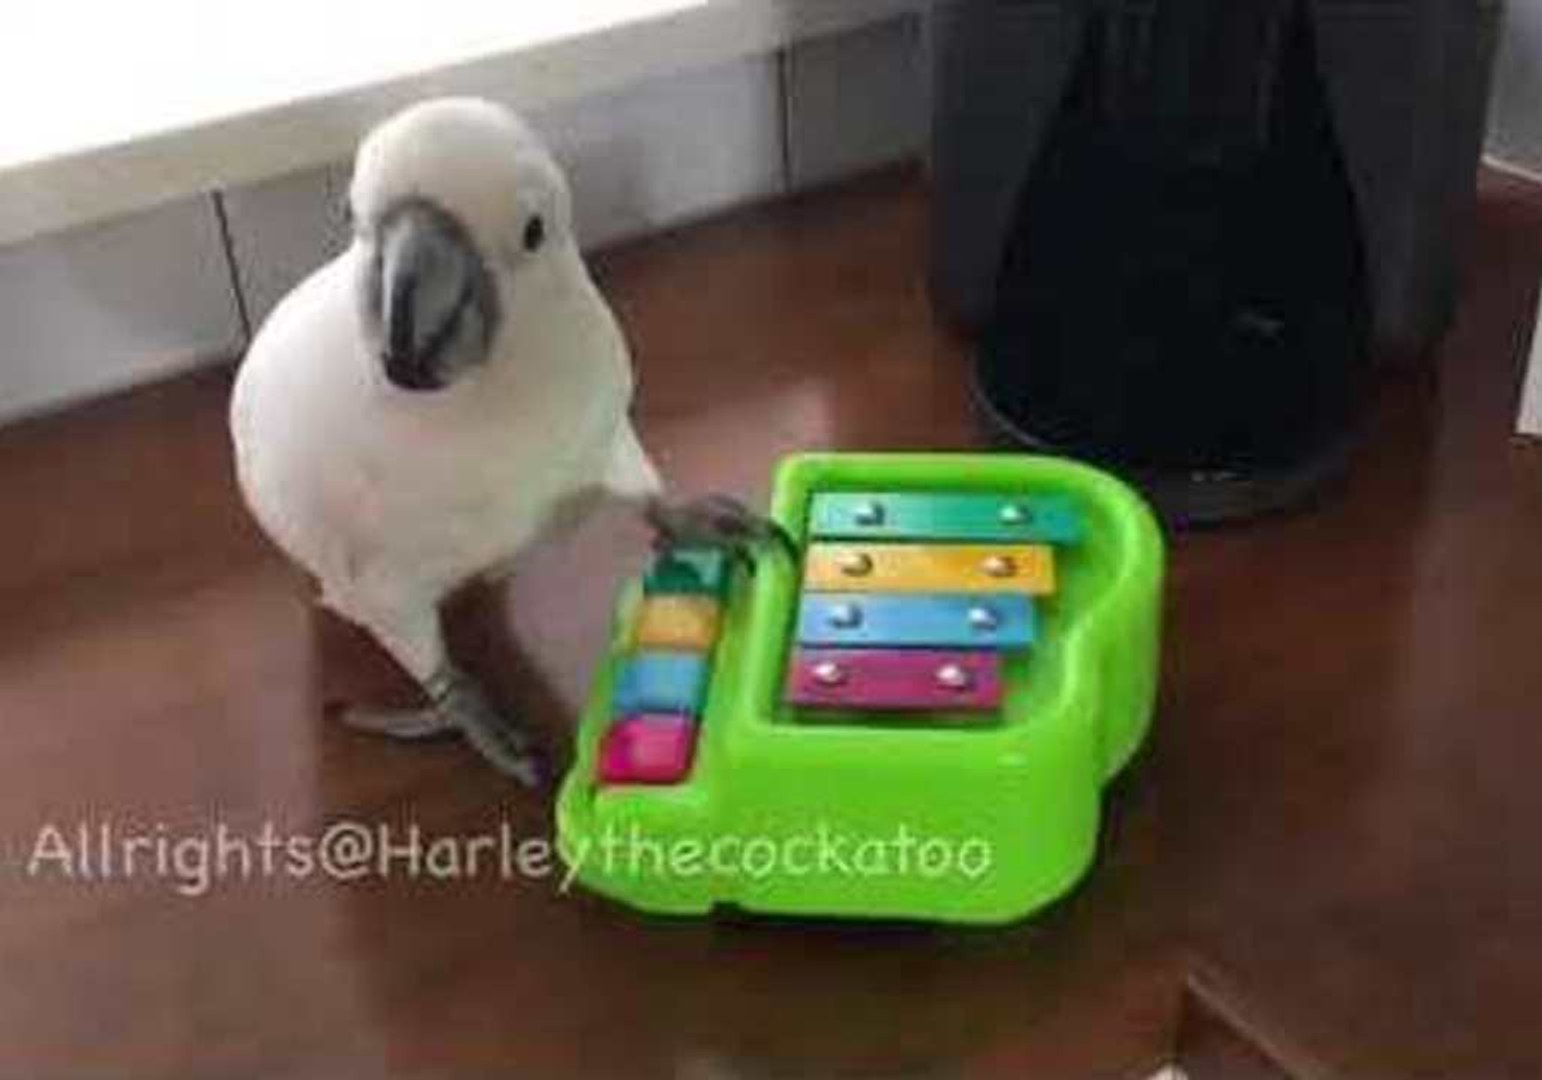 Harley the Cockatoo Is a Masterful Pianist